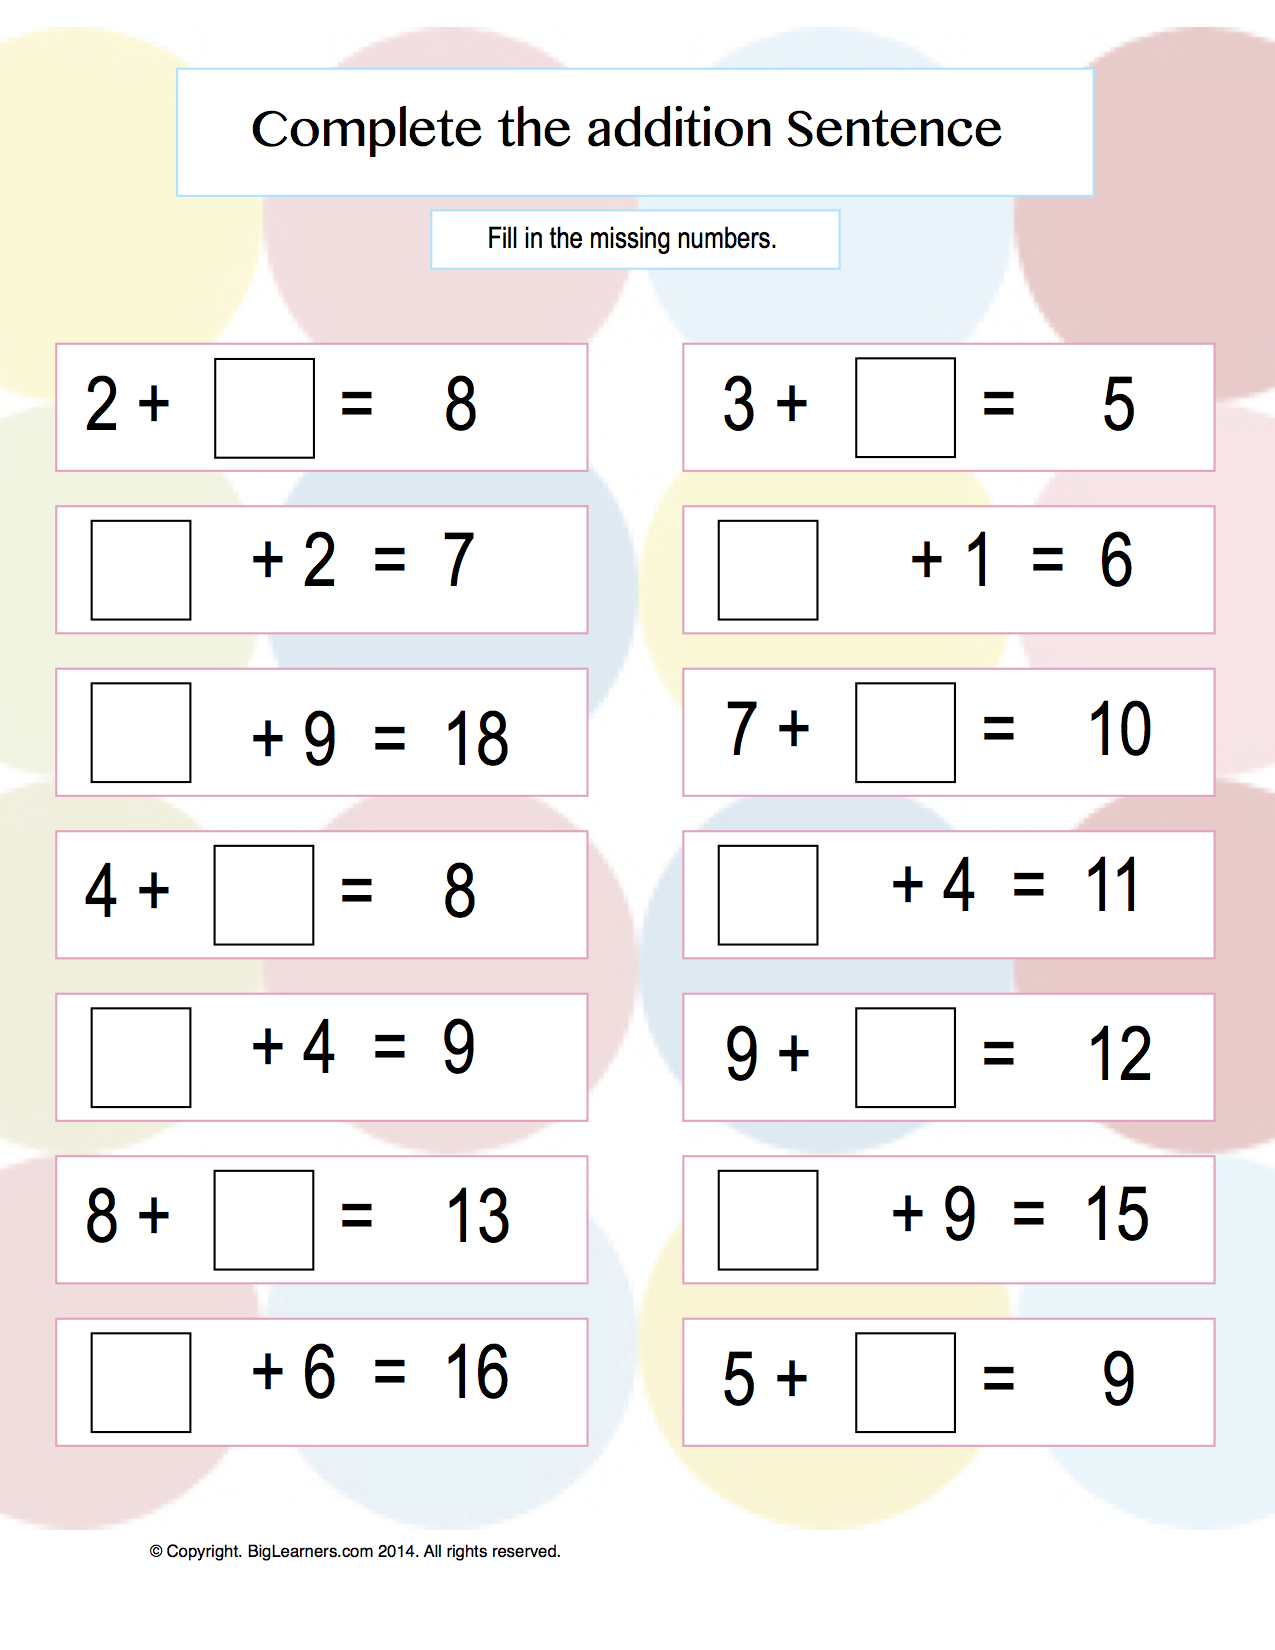 Solving Multiplication And Division Equations Worksheets Missing Numbers In Equations